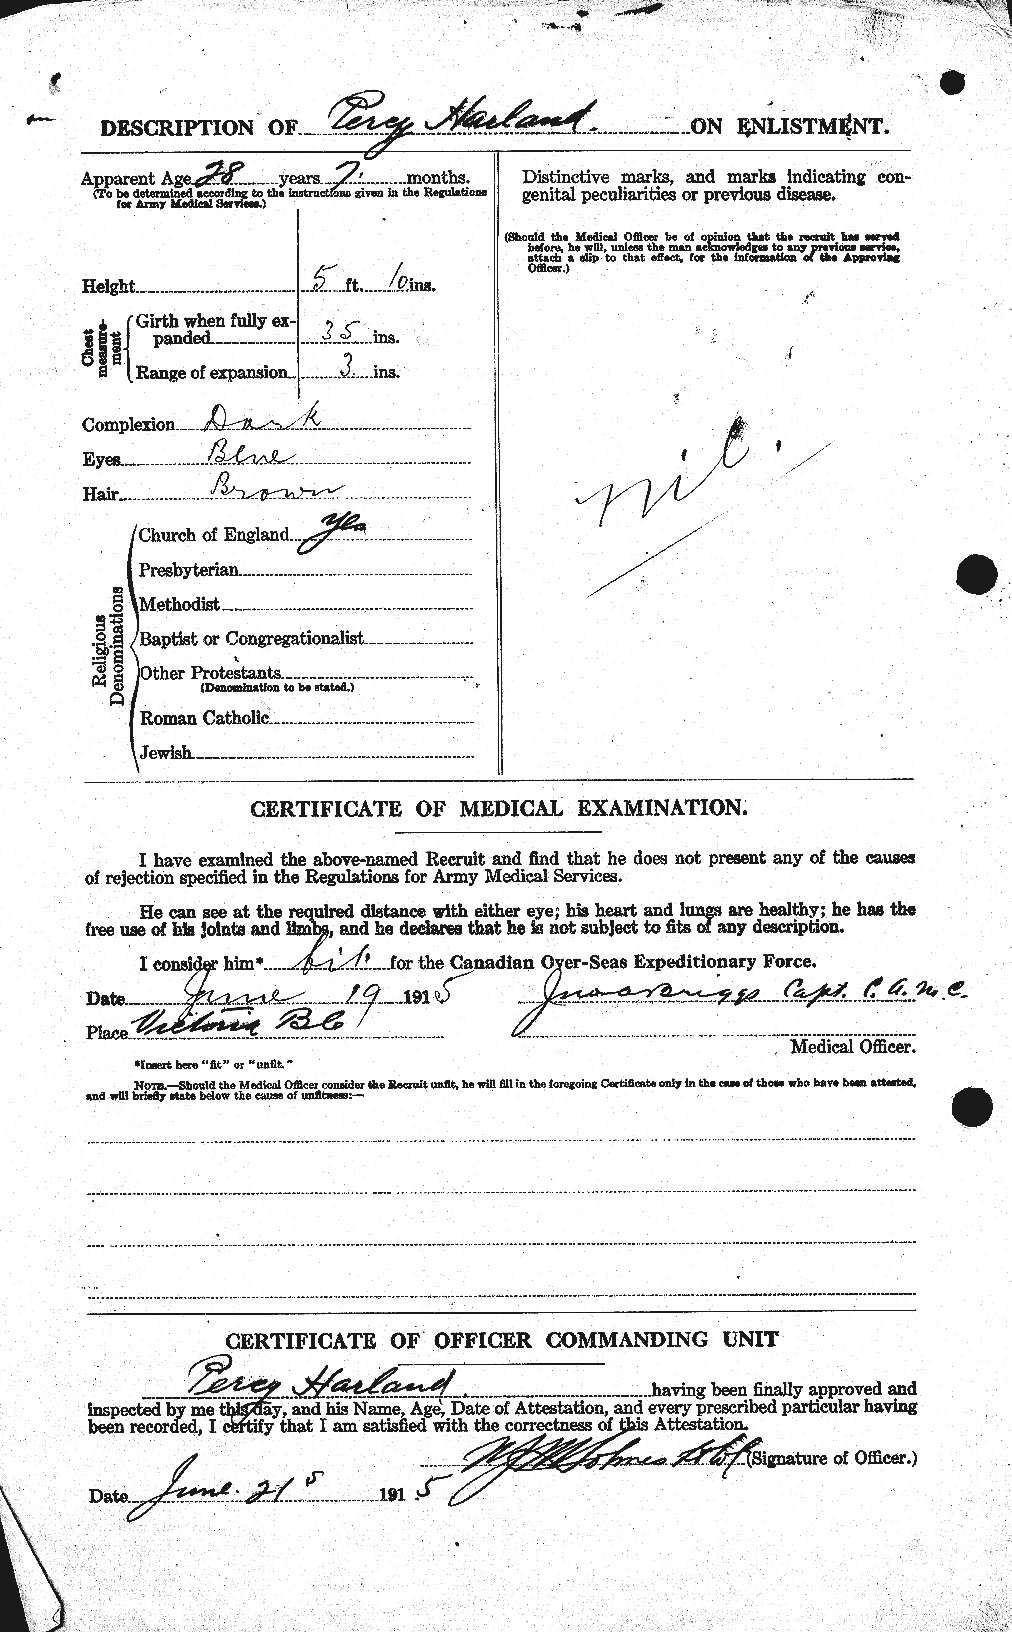 Personnel Records of the First World War - CEF 376700b